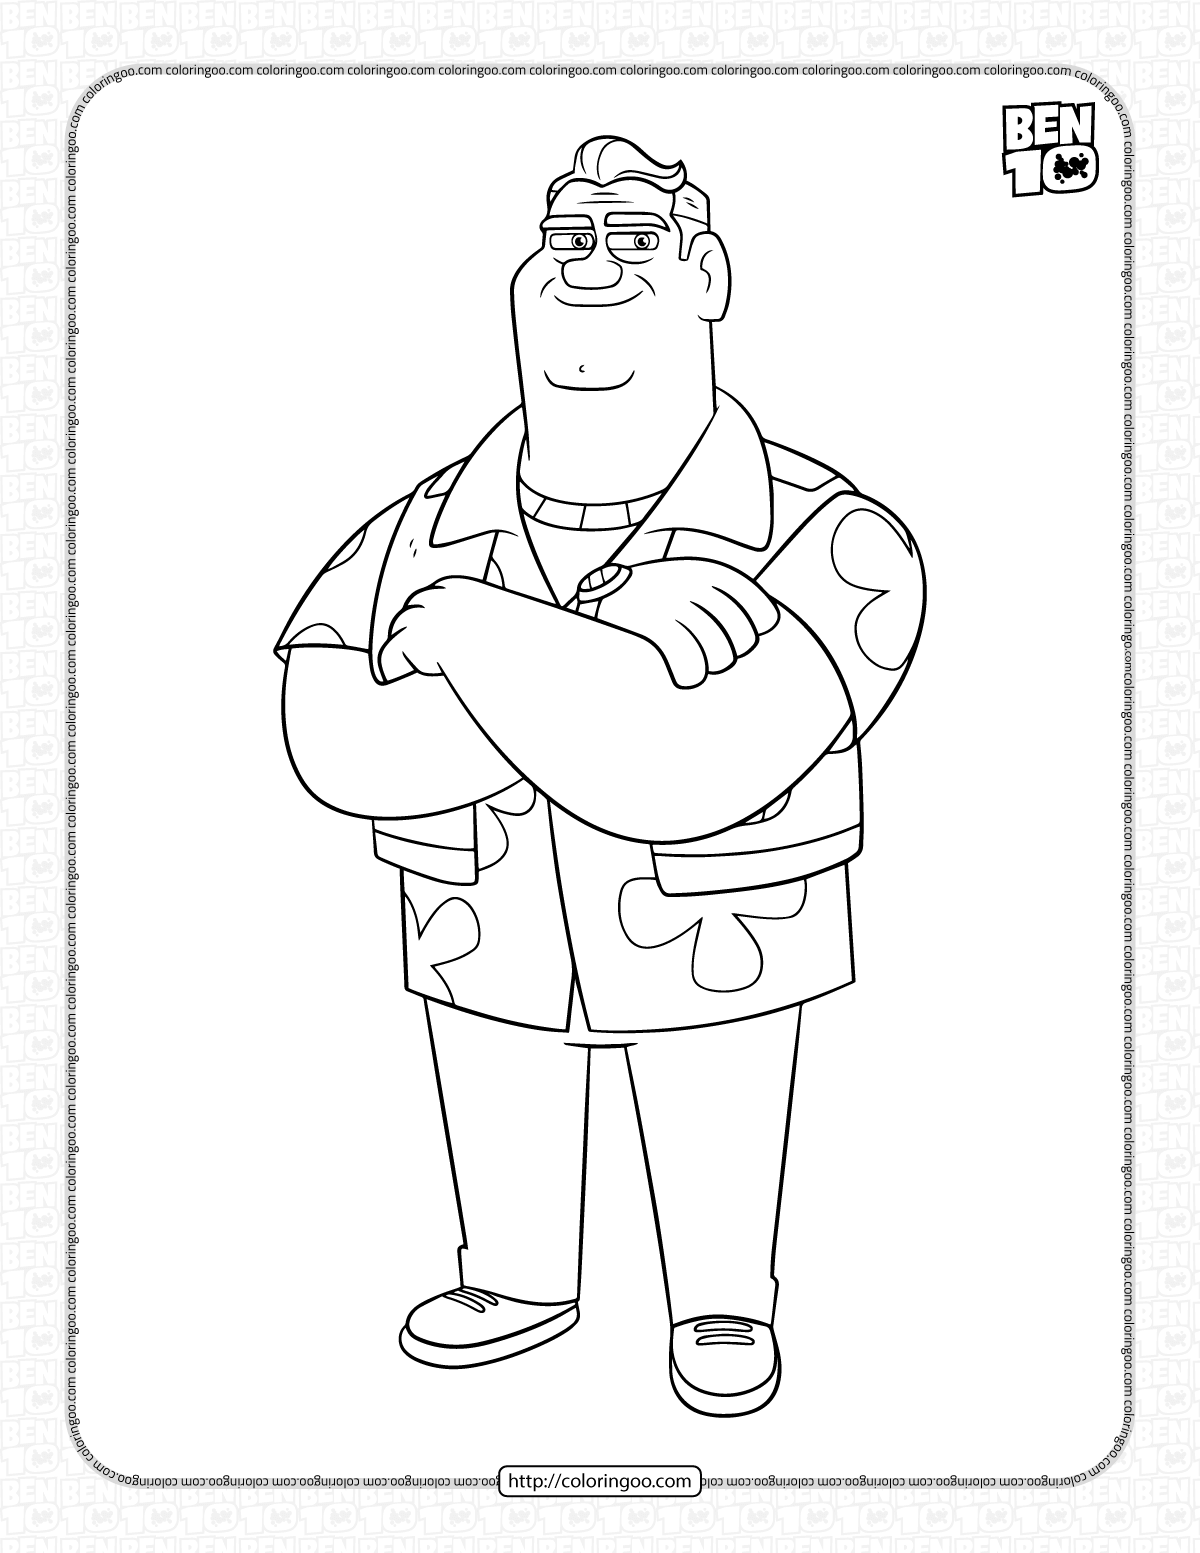 Ben 10 Max Tennyson Coloring Pages